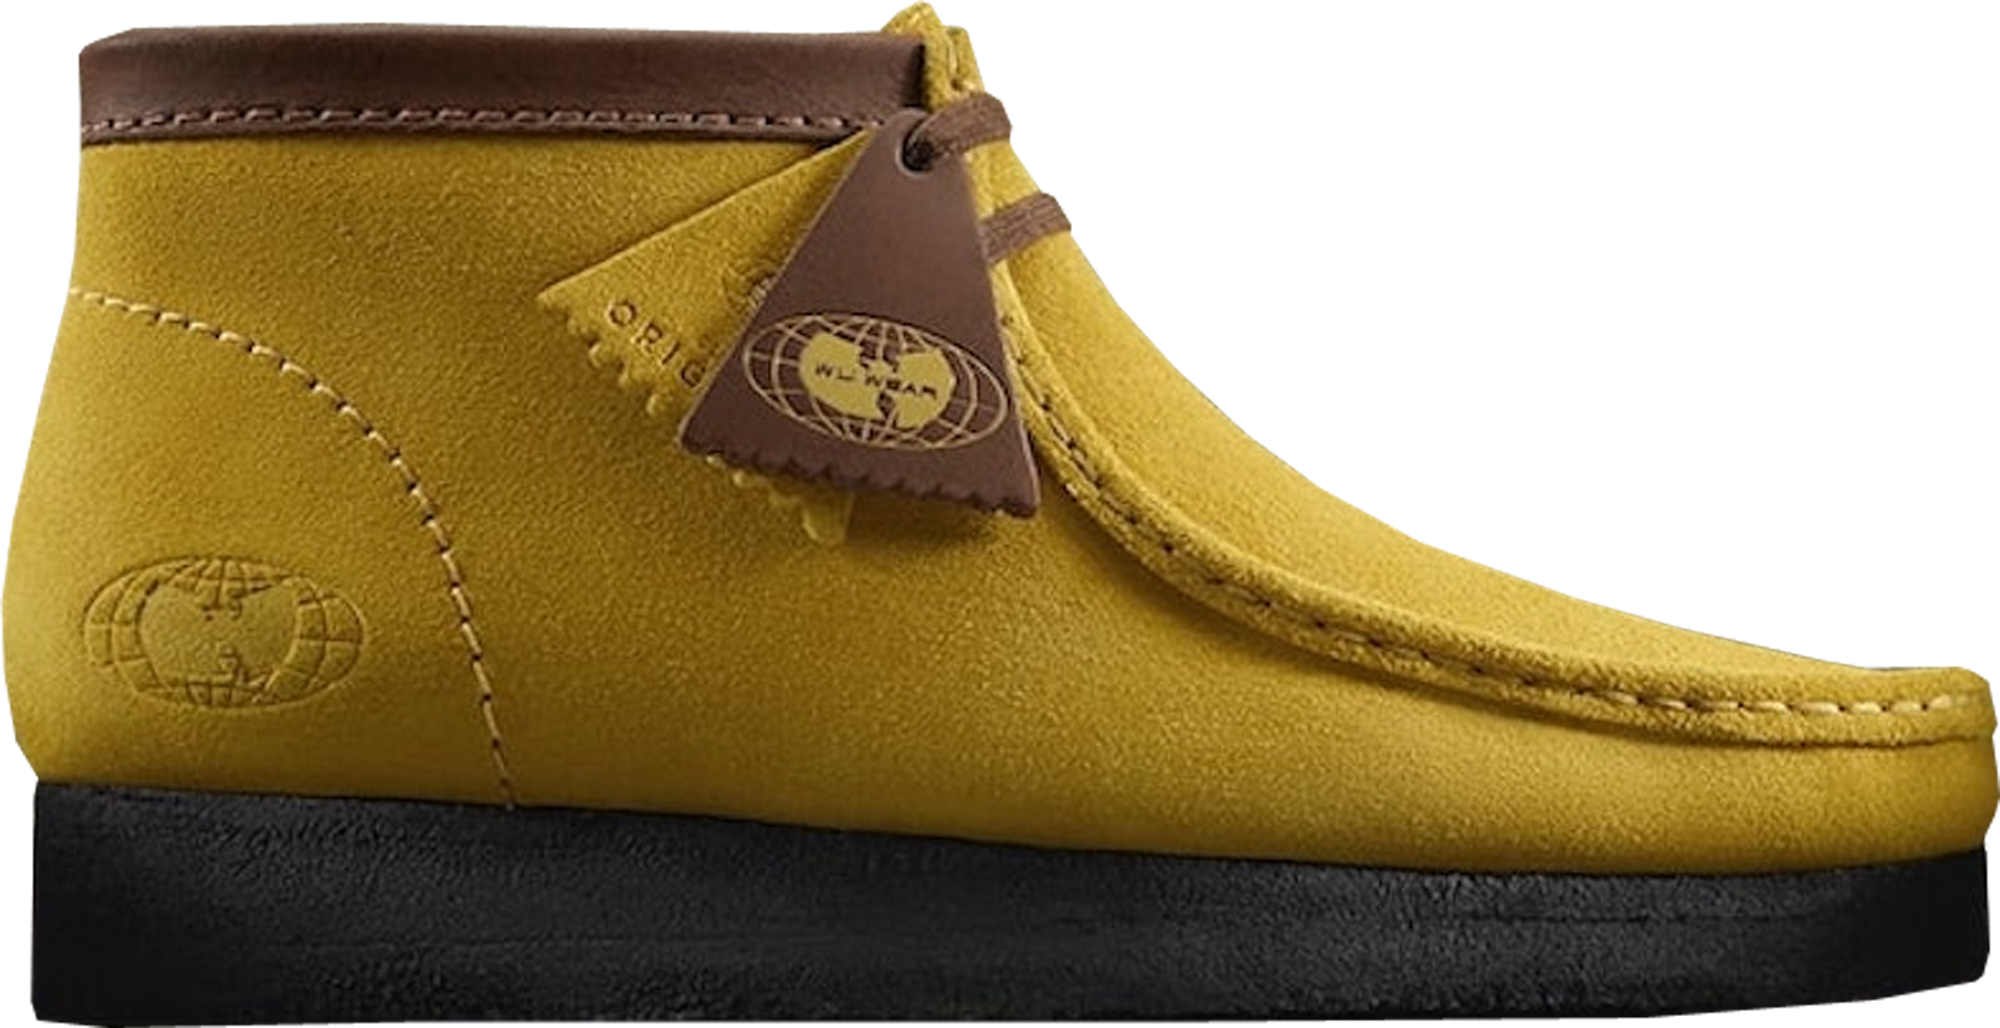 wu tang wallabees for sale